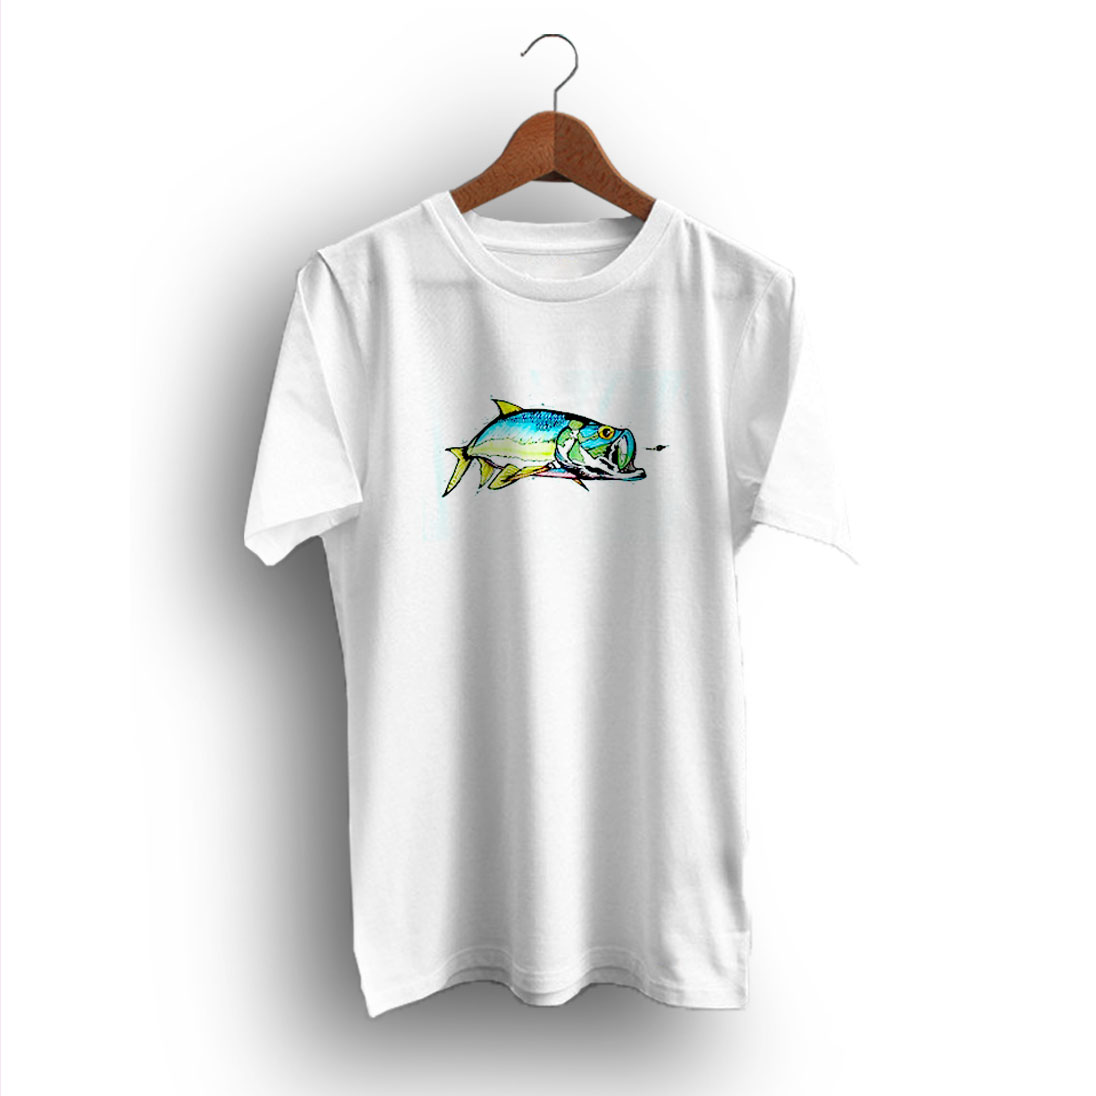 Awesome Graphic Selection Of Fish Patagonia T-Shirt - Design Bigvero